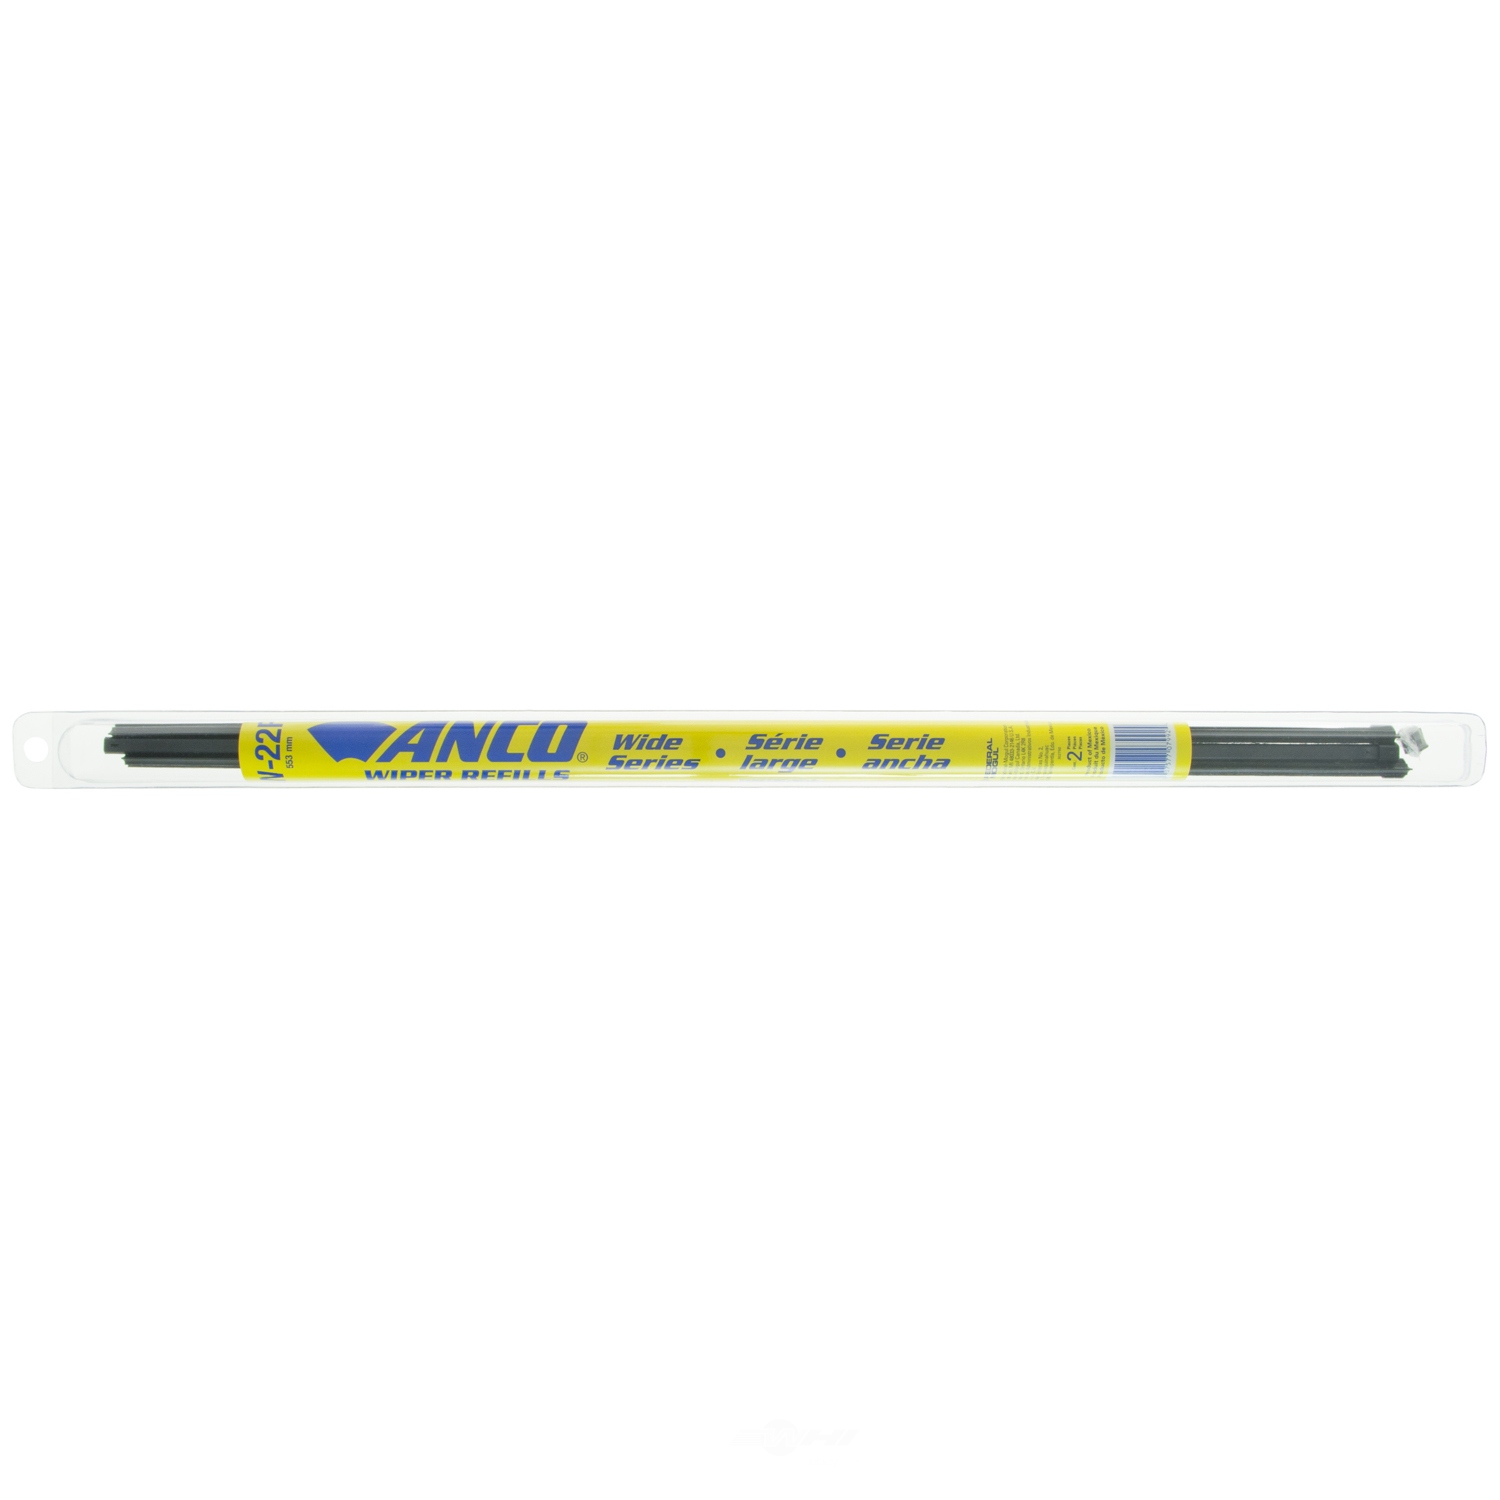 ANCO WIPER PRODUCTS - Wide Series Refills - ANC W-22R